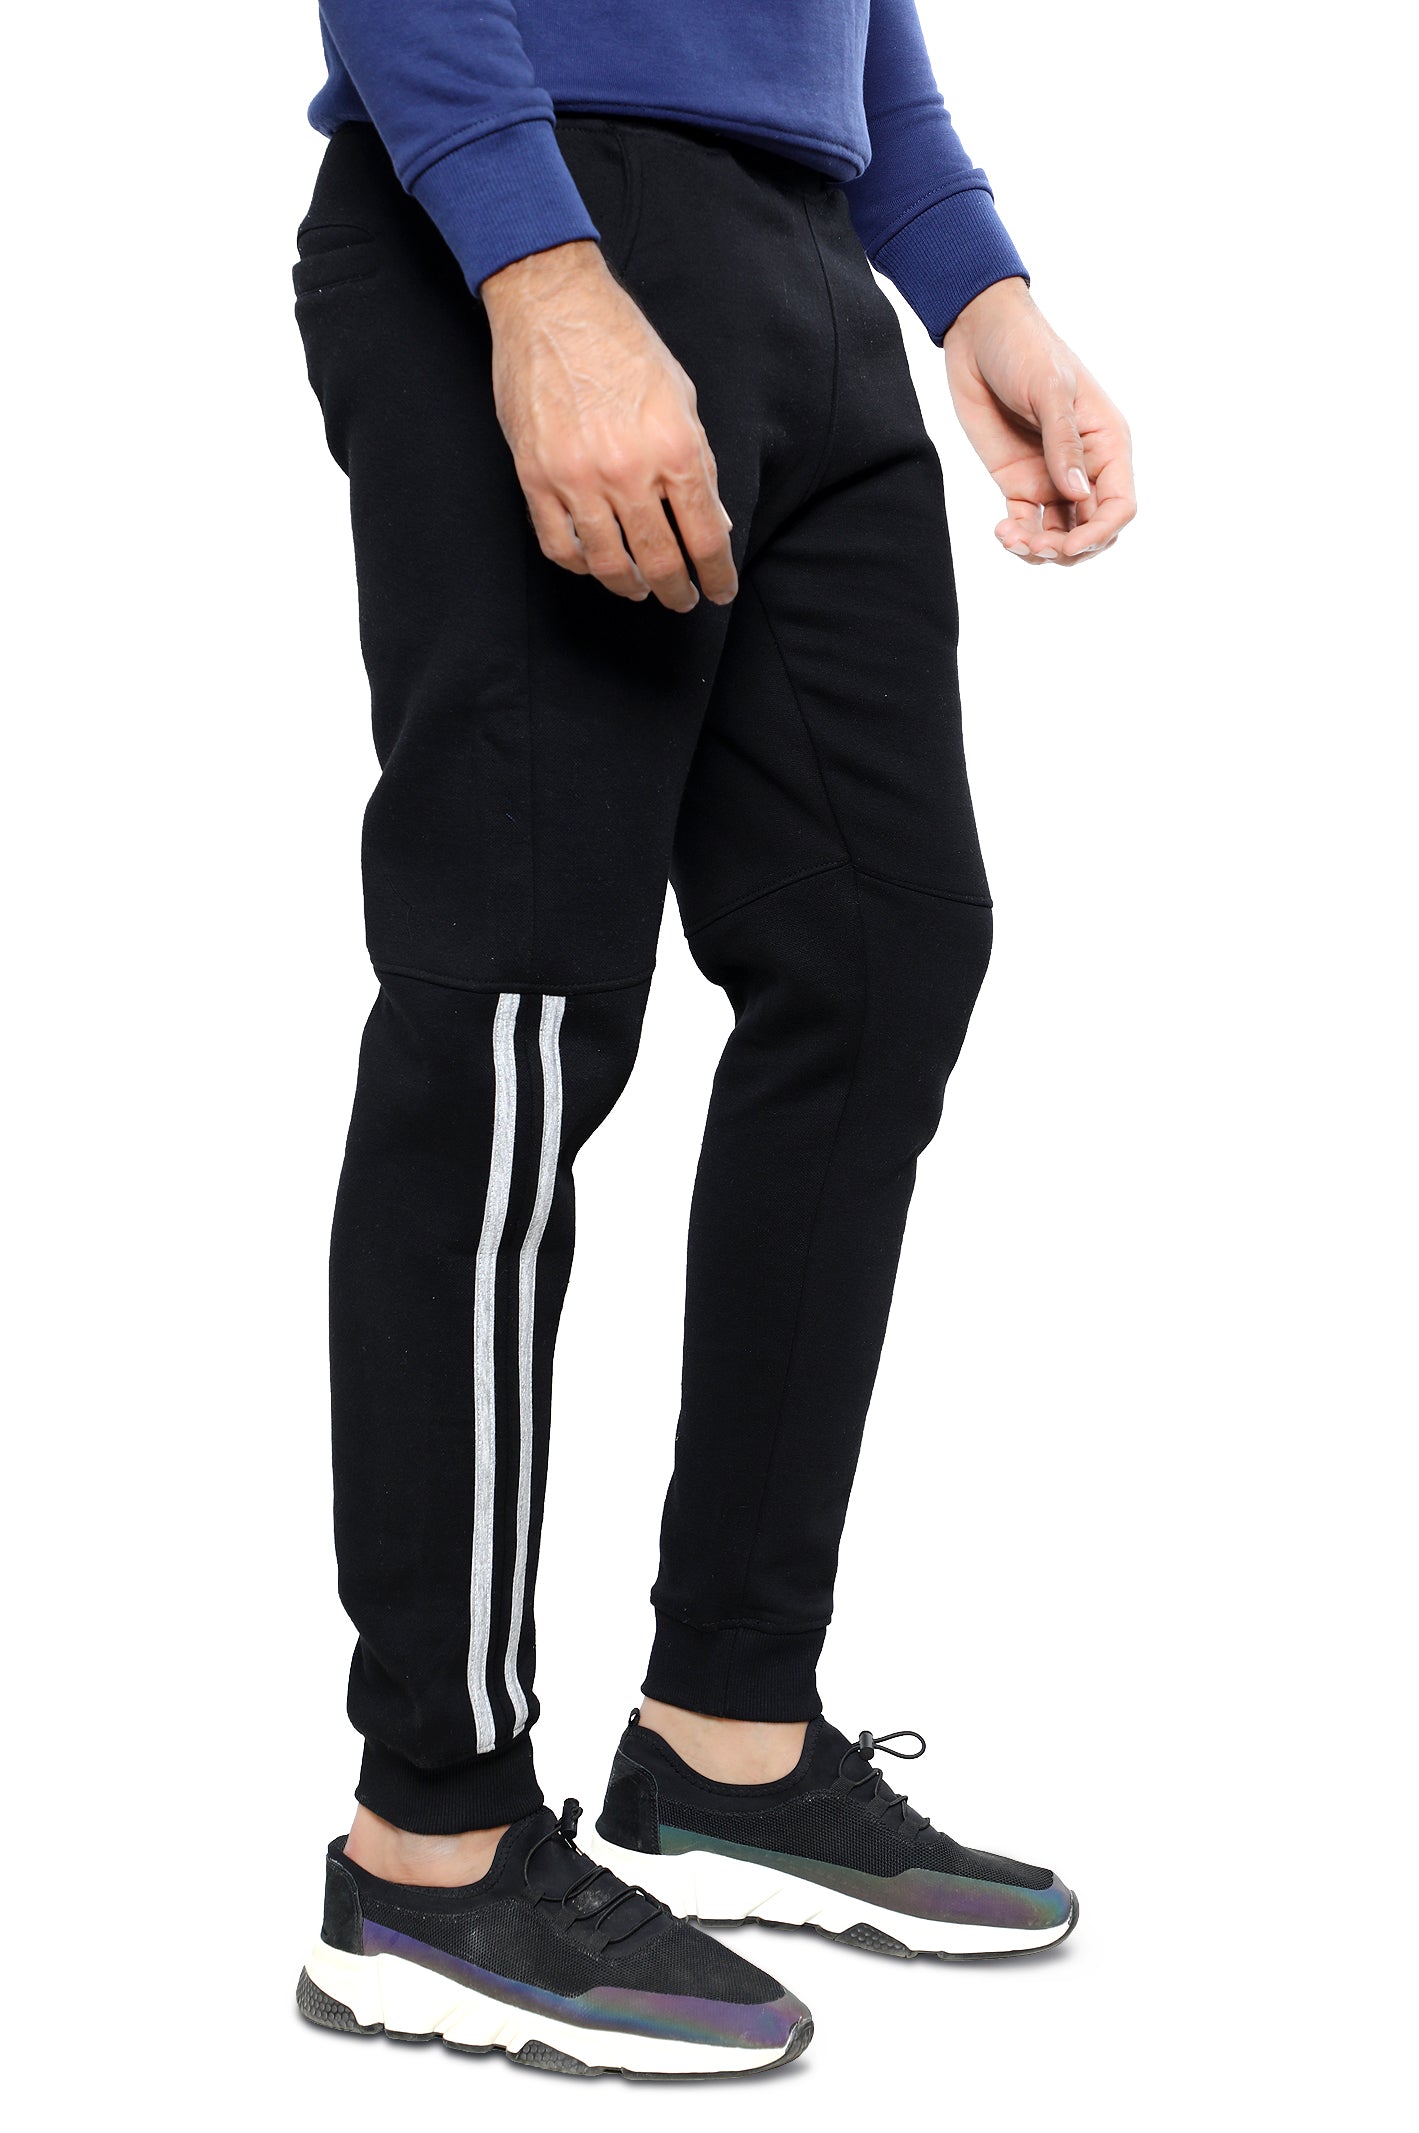 Diners Mens Sports Trouser SKU: FA995-BLACK - Diners